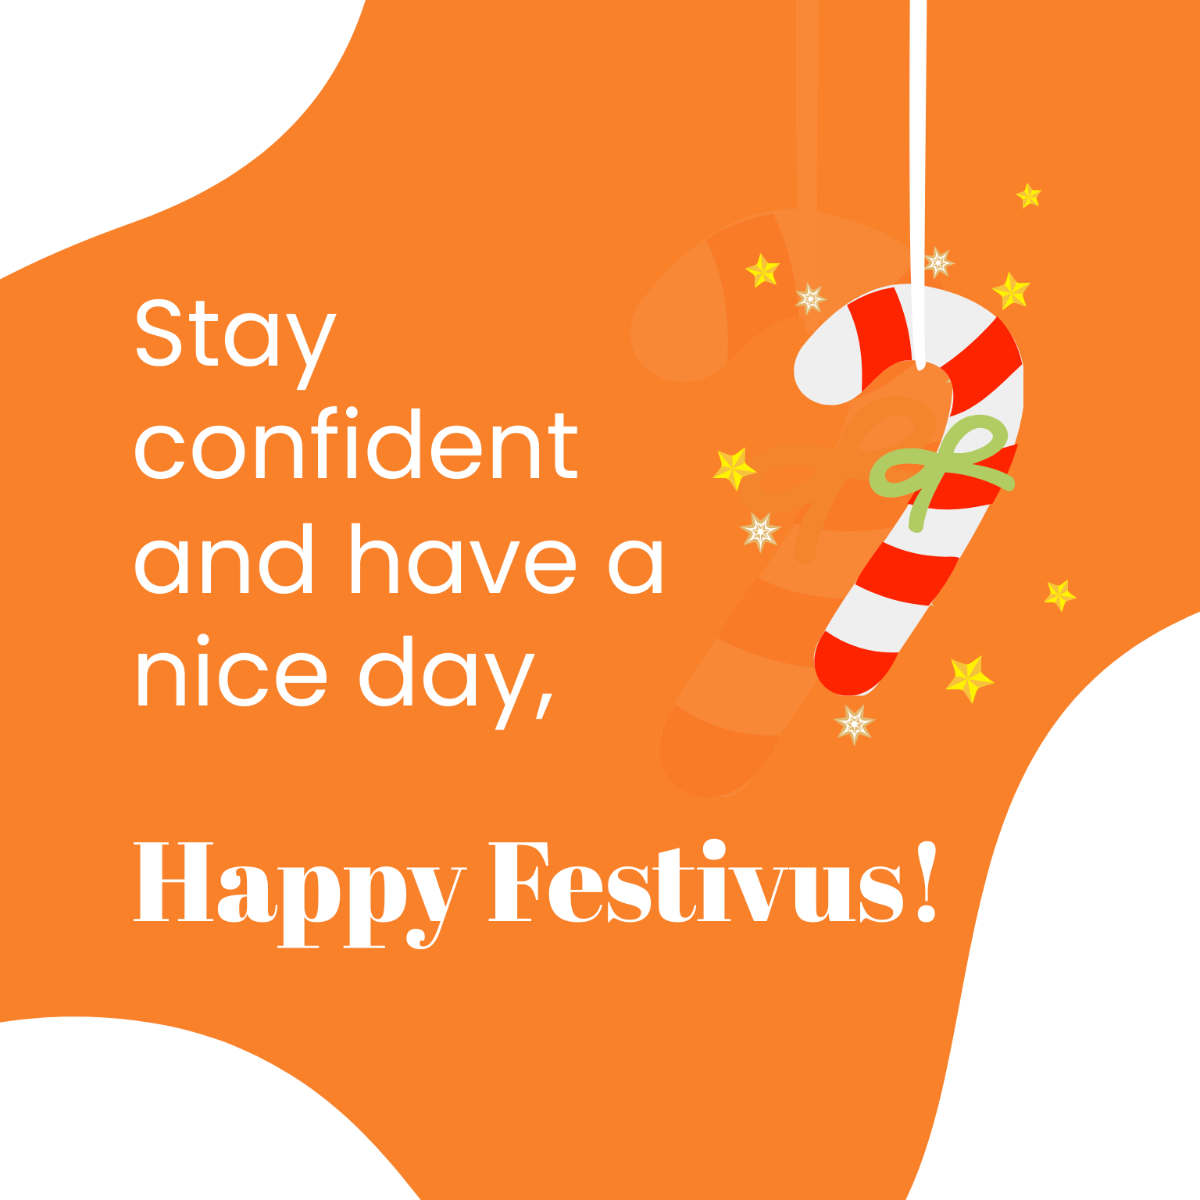 Free Festivus Greeting Card Vector Template